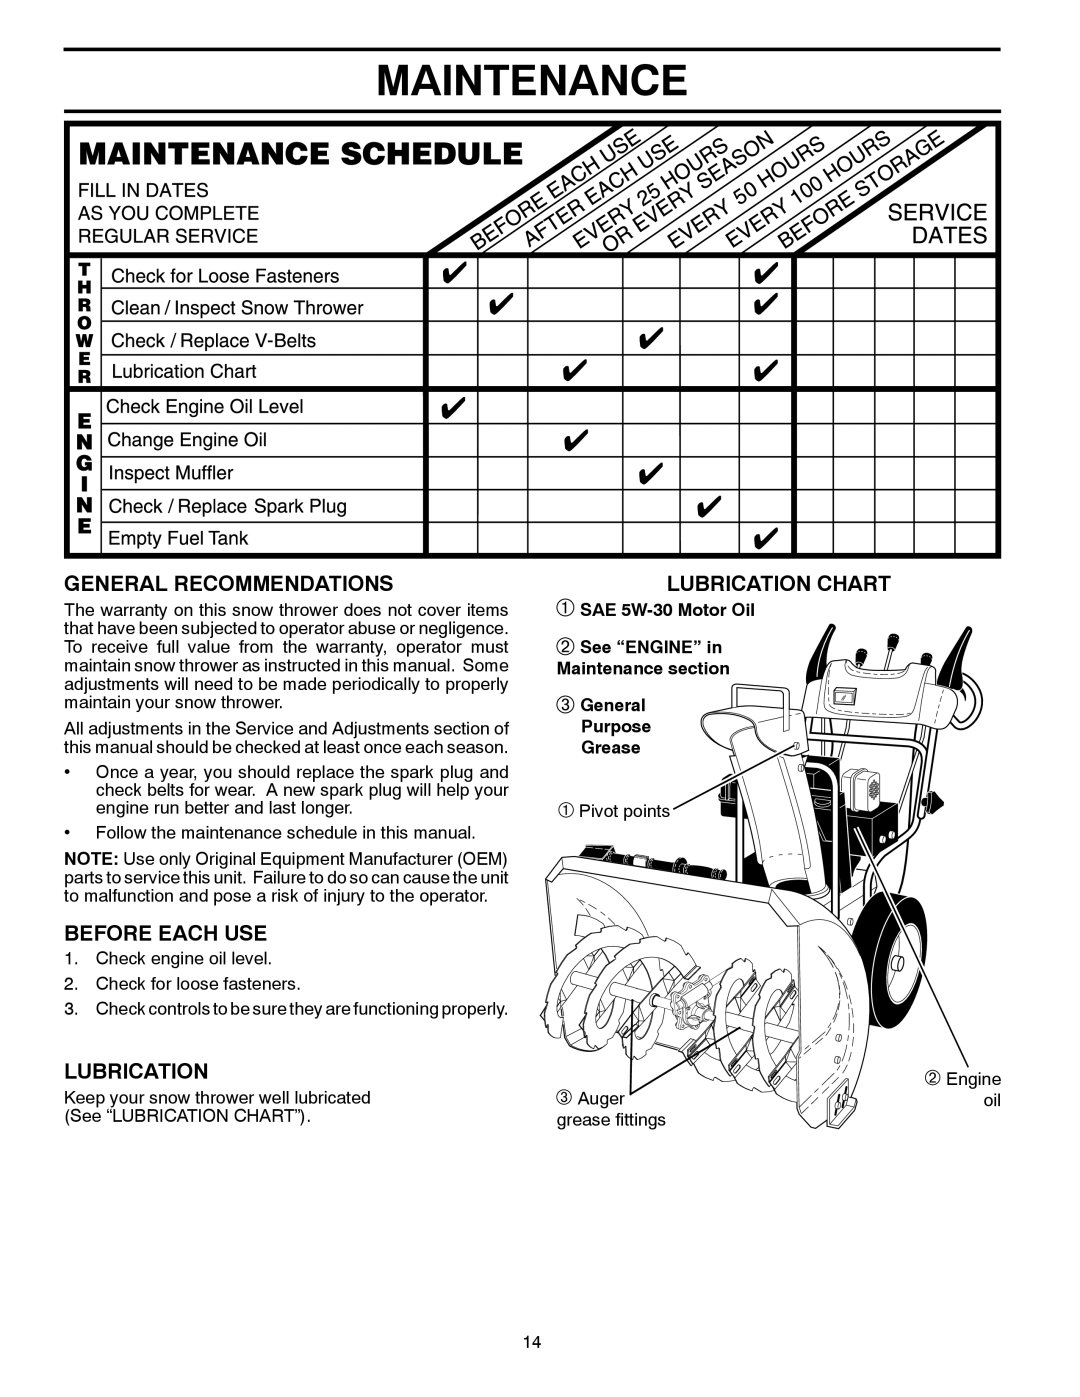 Poulan 96194000901, 435560 Maintenance, General Recommendations, Before Each Use, Lubrication Chart, Purpose Grease 